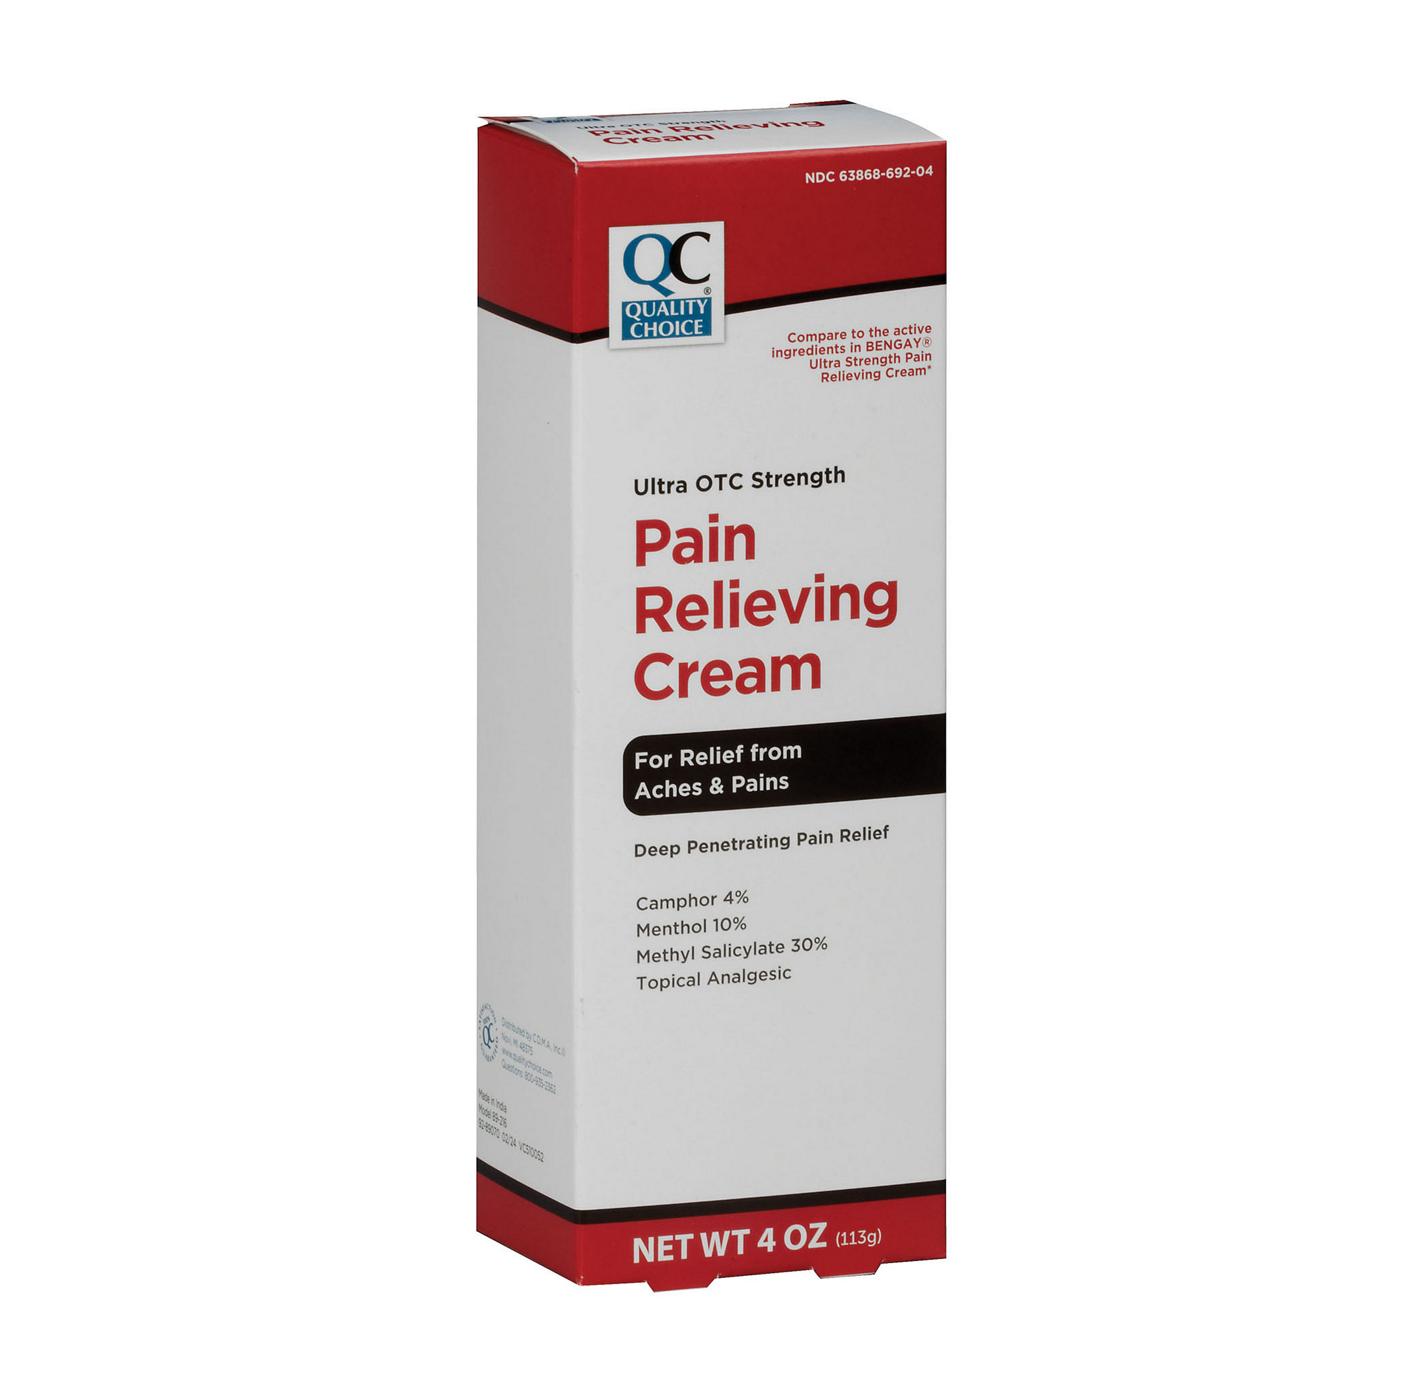 Quality Choice Ultra Strength Pain Relieving Cream; image 4 of 4